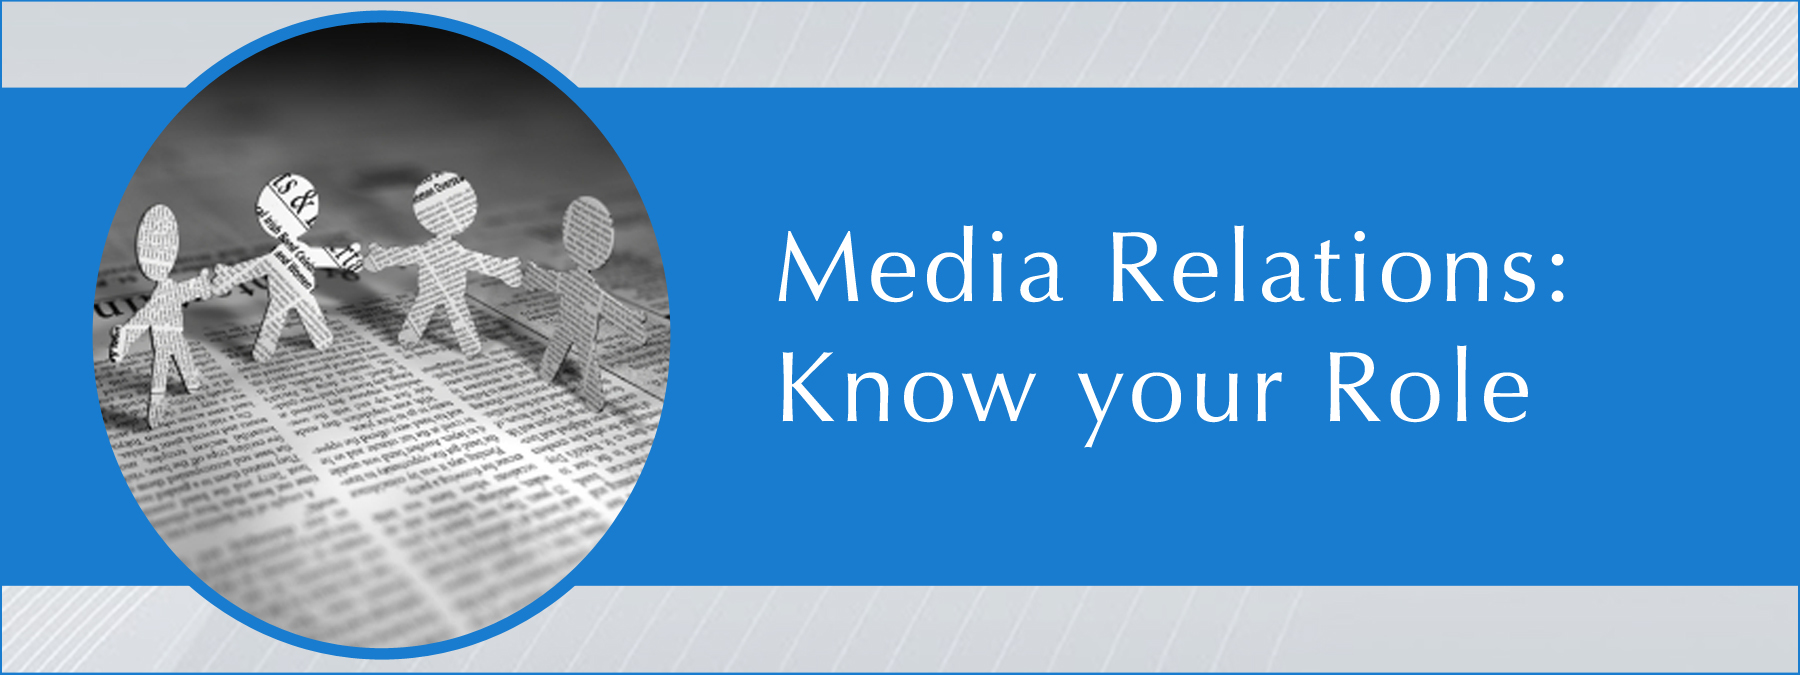 Media Relations: Know your Role